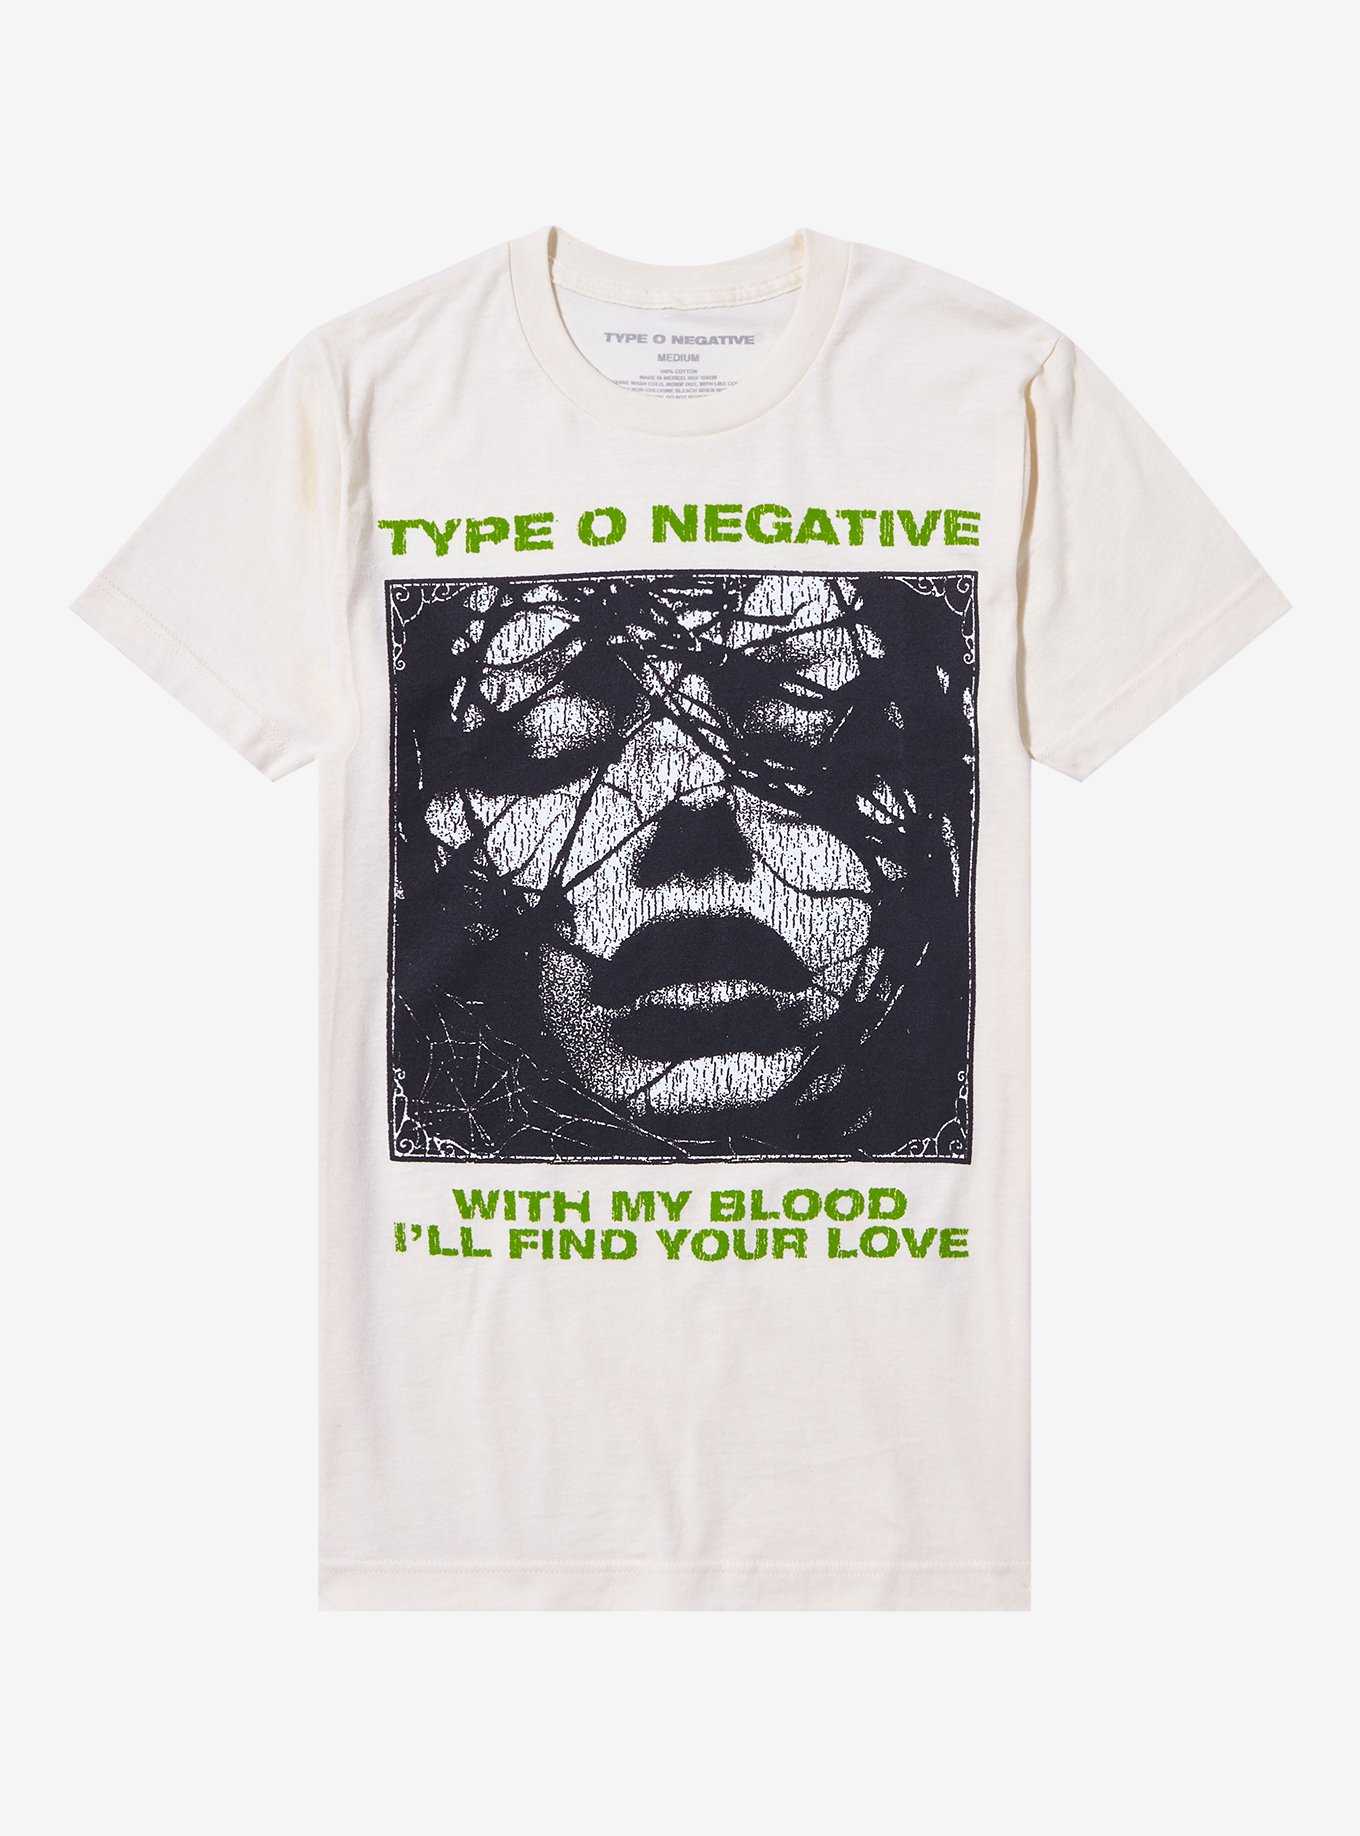 OFFICIAL Type O Negative Shirts and Merchandise